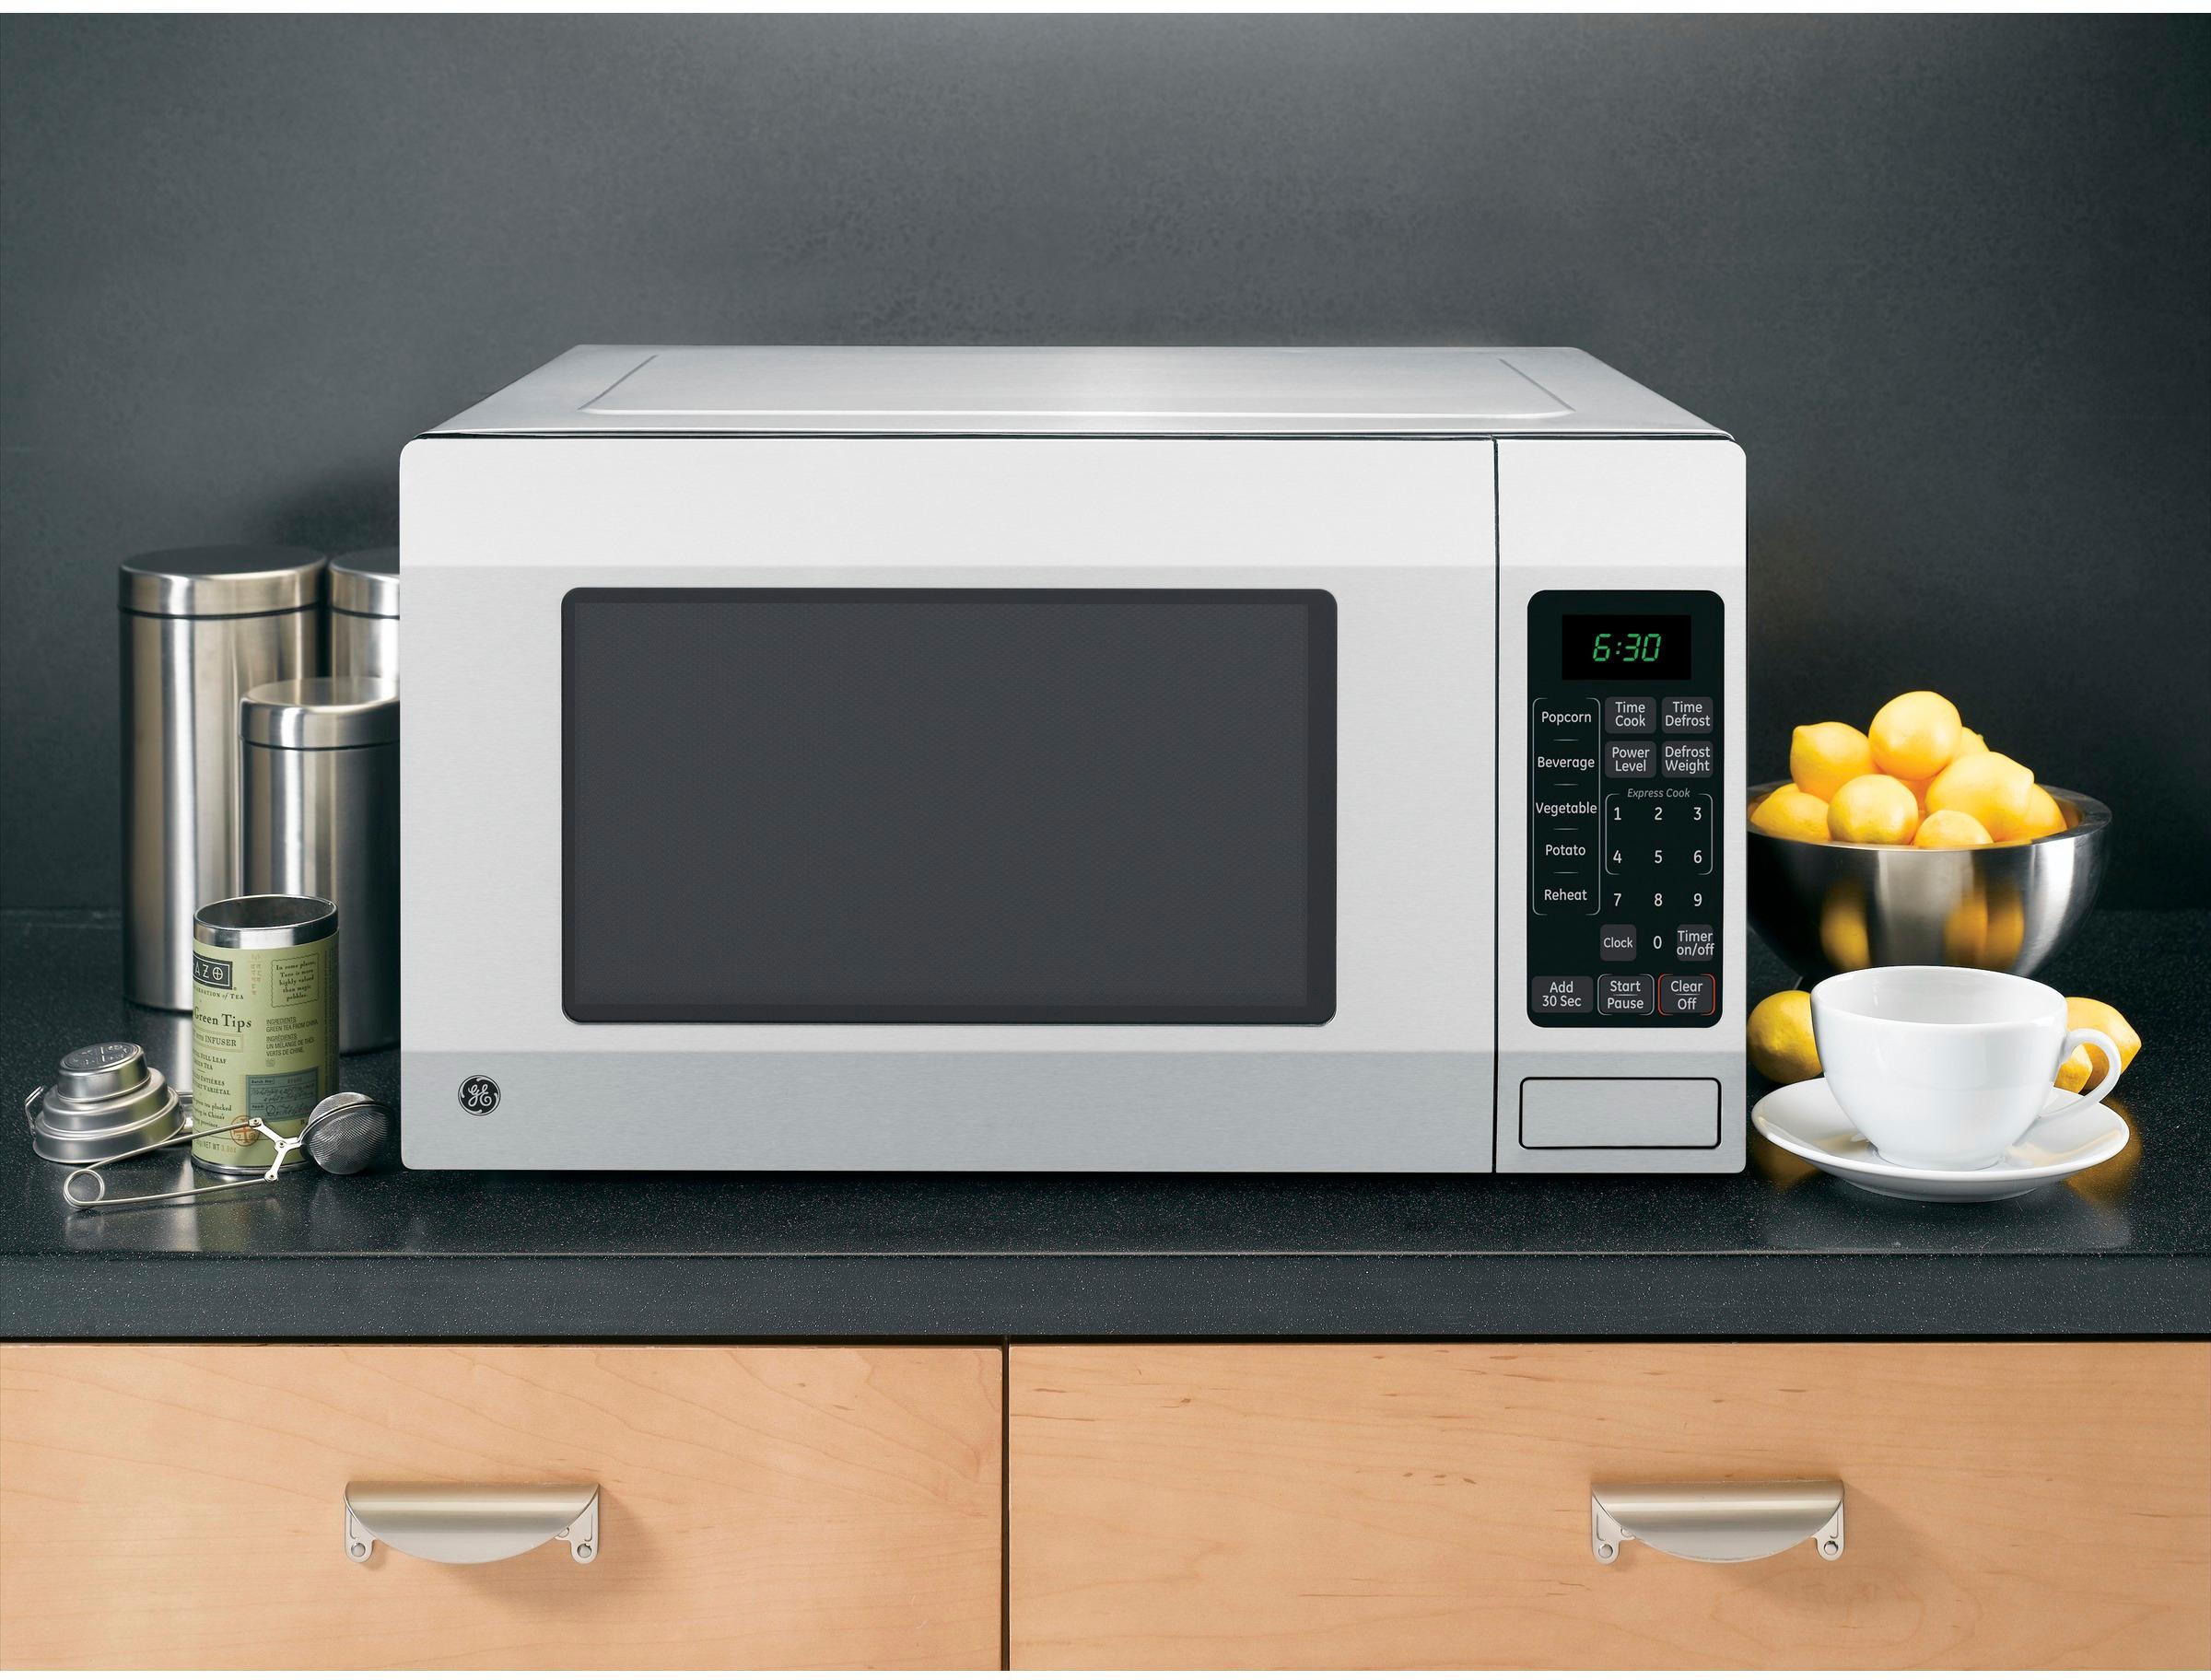 GE 1.6 Cu. Ft. Microwave with Sensor Cooking Stainless Steel JES1657SMSS -  Best Buy